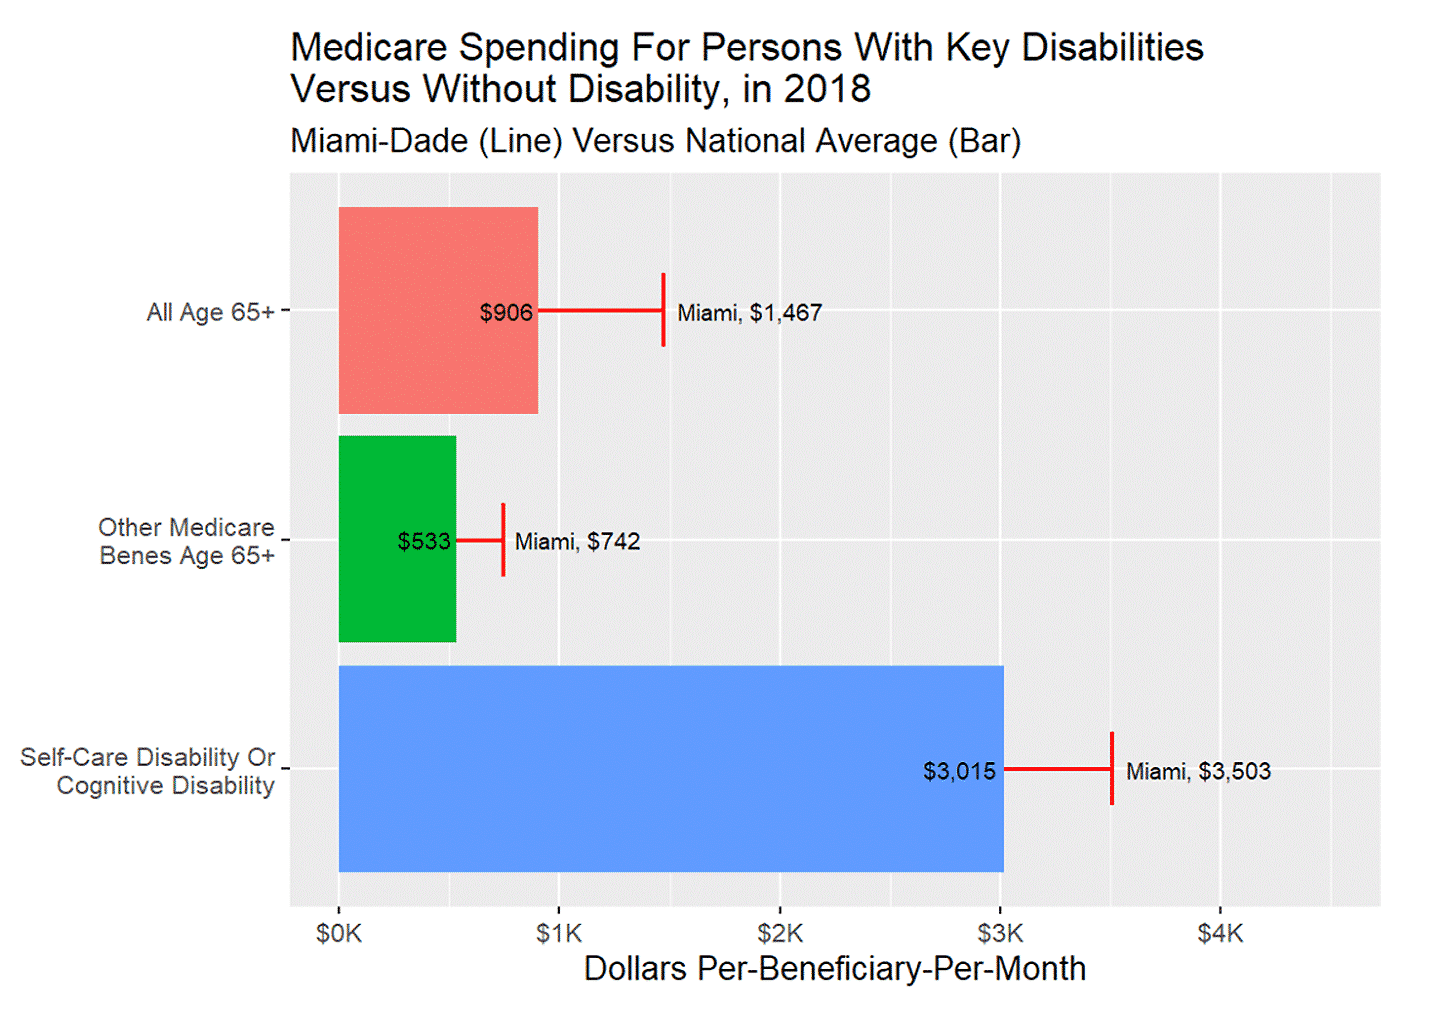 Altarum Medicare Spending For Persons with Key Disabilities vs Without 2018